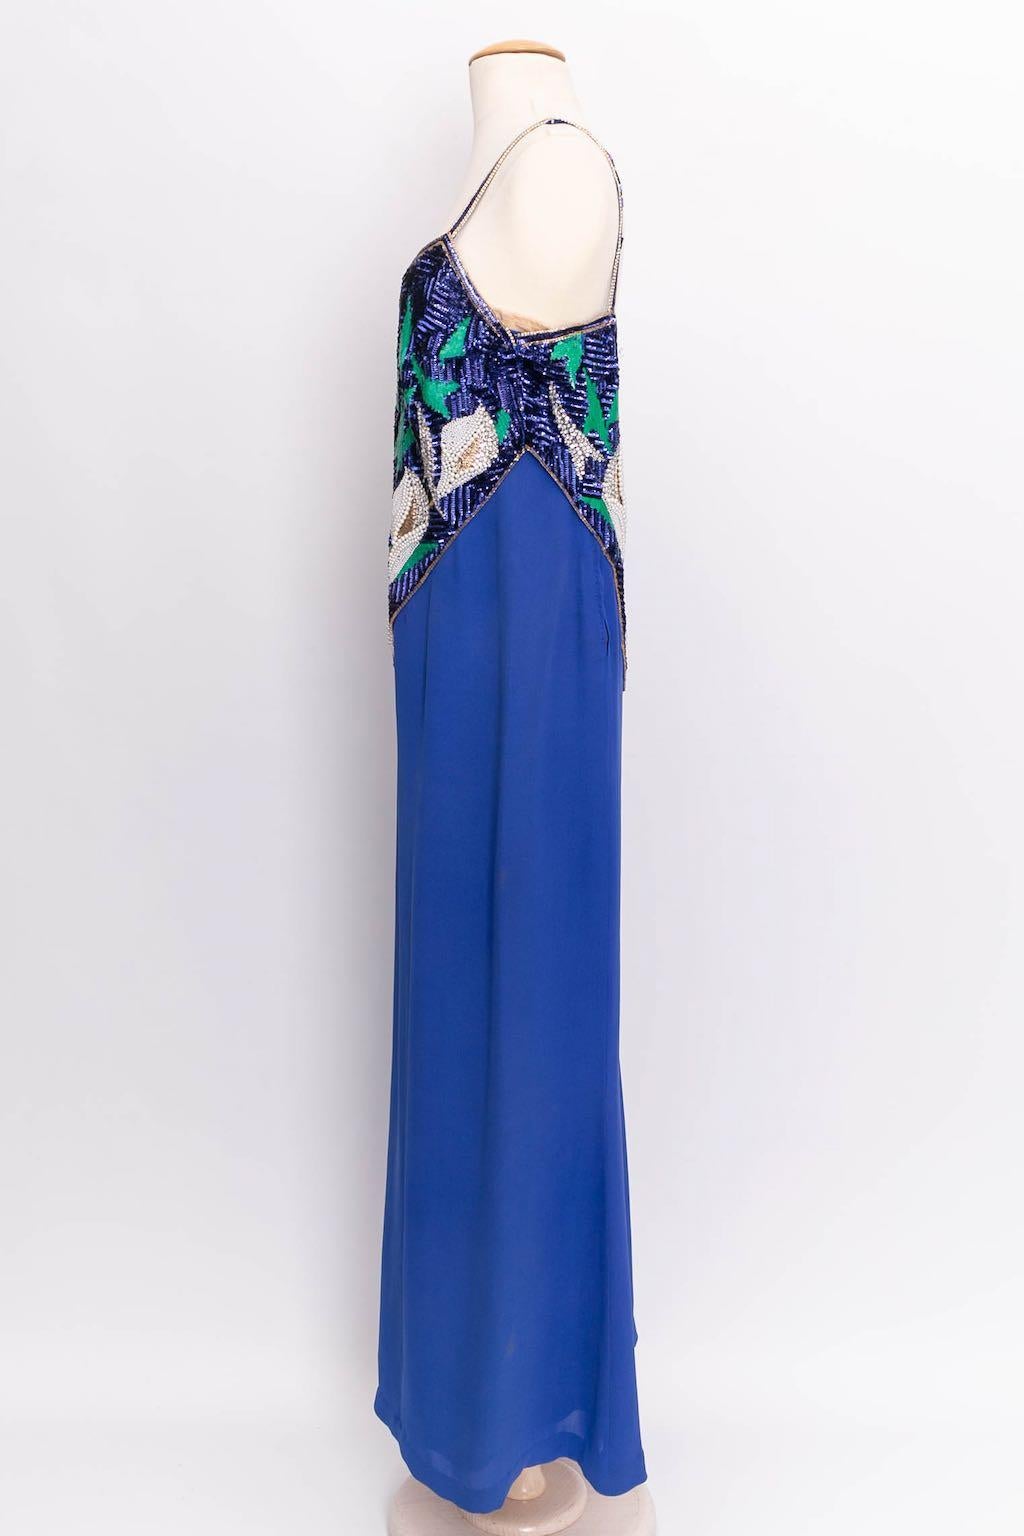 Pierre Balmain Haute Couture - Evening dress in viscose embroidered with pearly beads. No composition or size tag, it fits a size 36FR/38FR.

Additional information: 

Dimensions: 
Bust: 47 cm (18.5